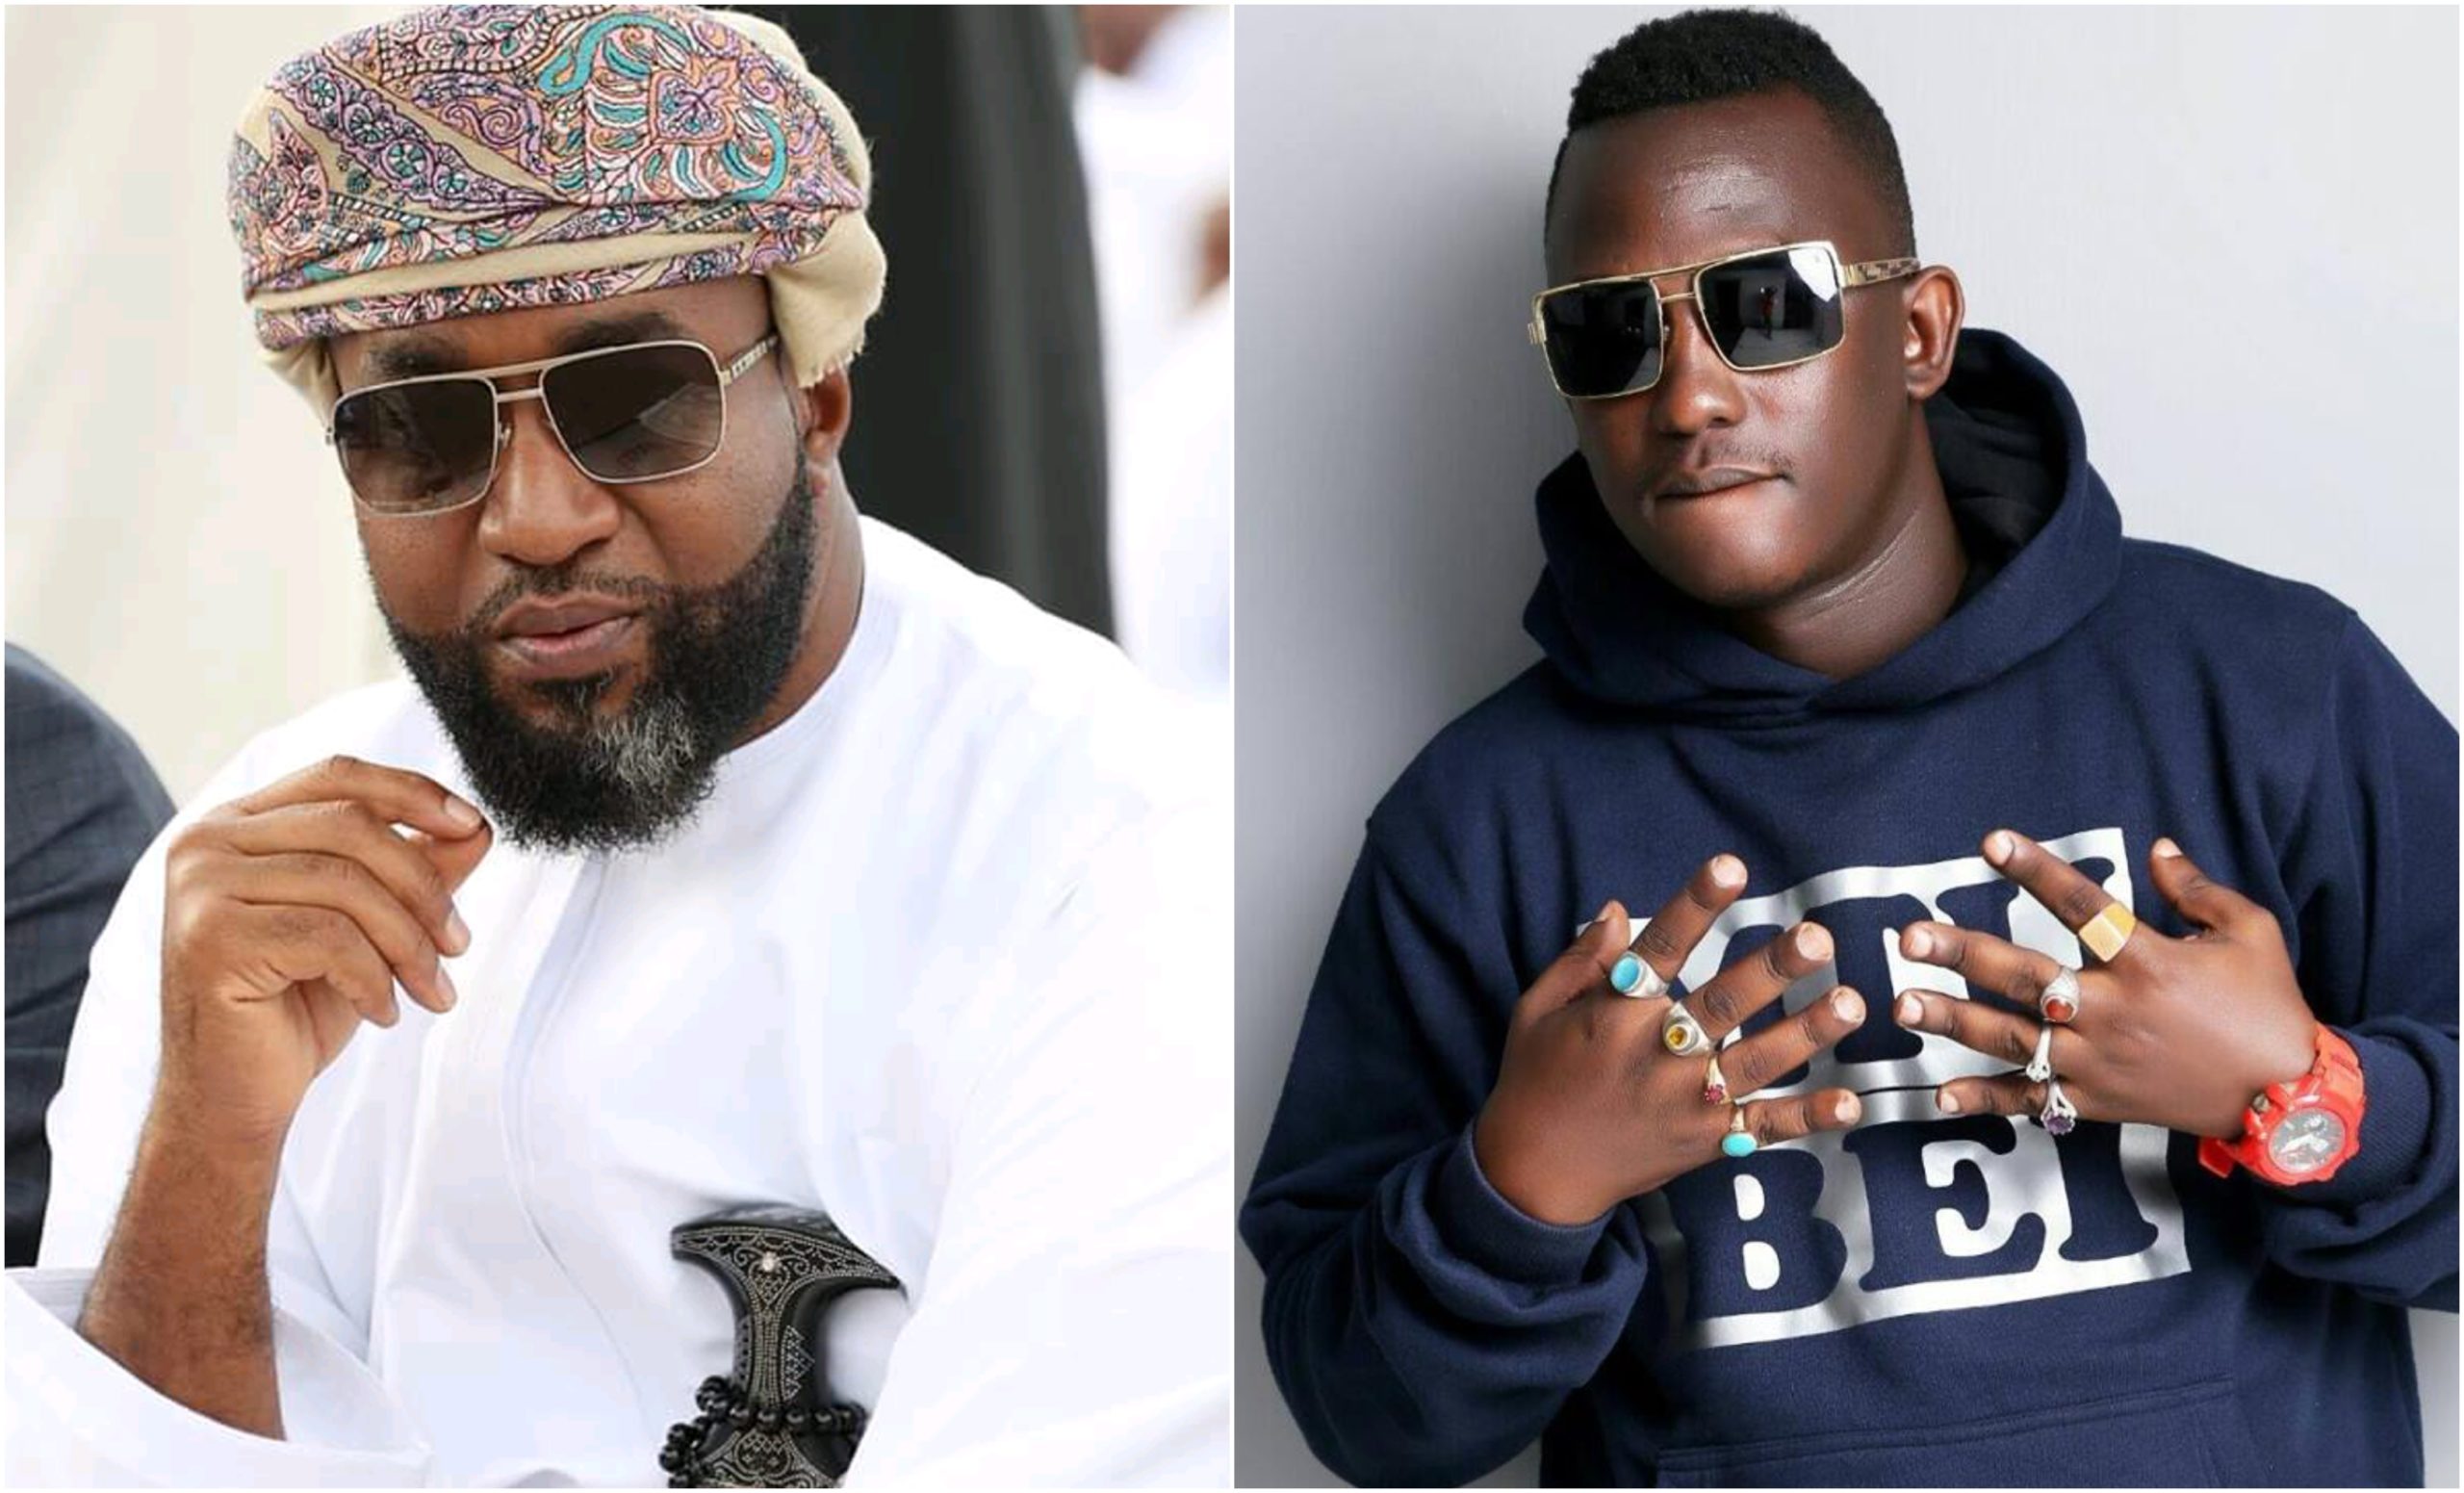 Susumila comes clean on being ‘The Mombasa Cartel’ and his close ties with Governor Hassan Joho (Video)